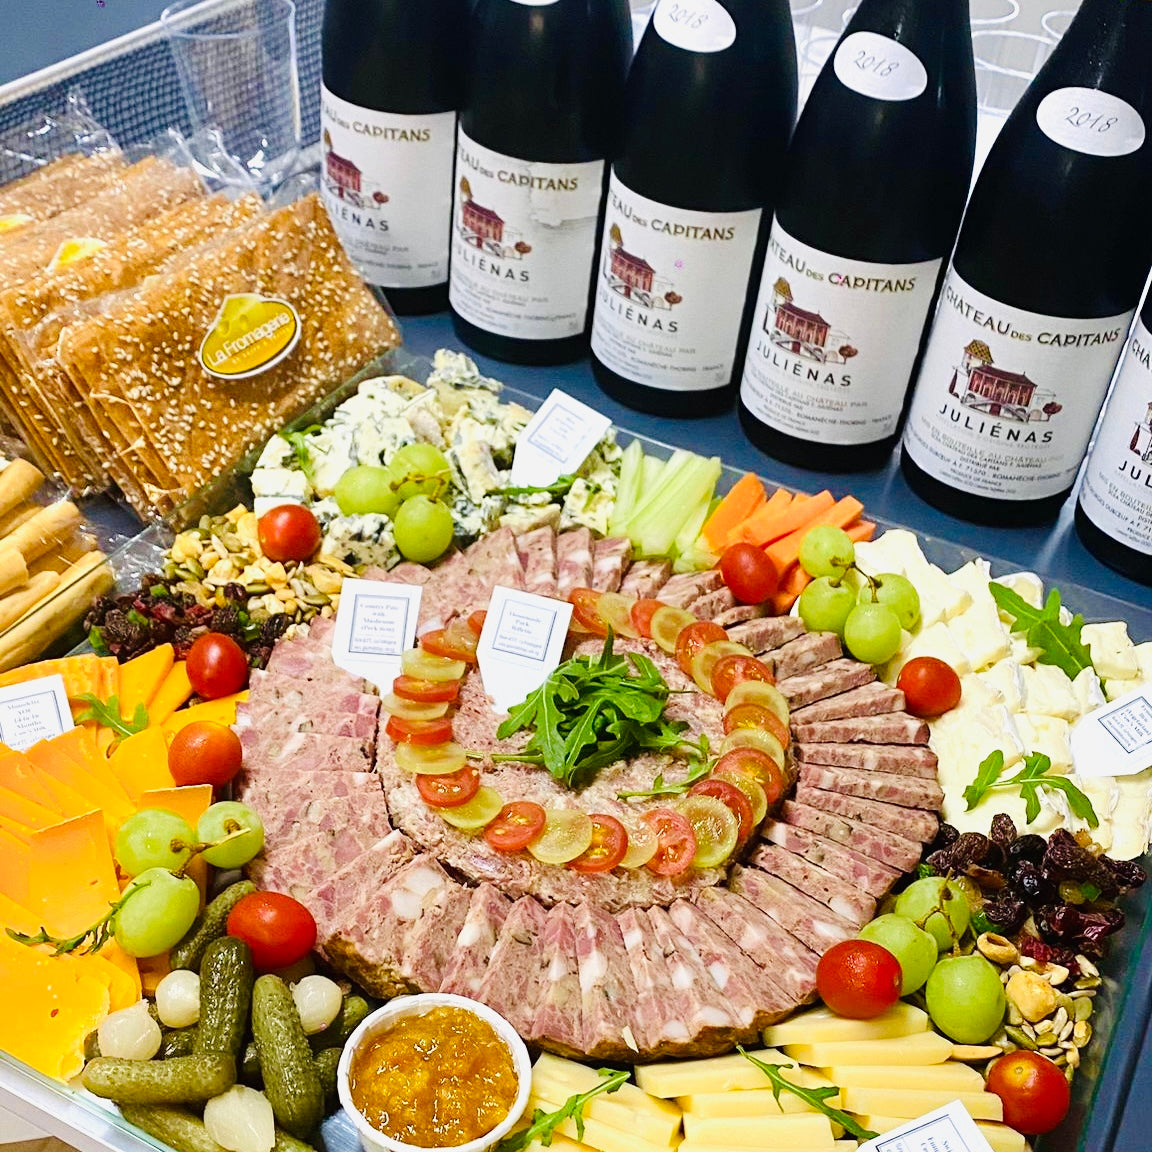 Mega Platter with Cheese & Charcuterie (2kg)